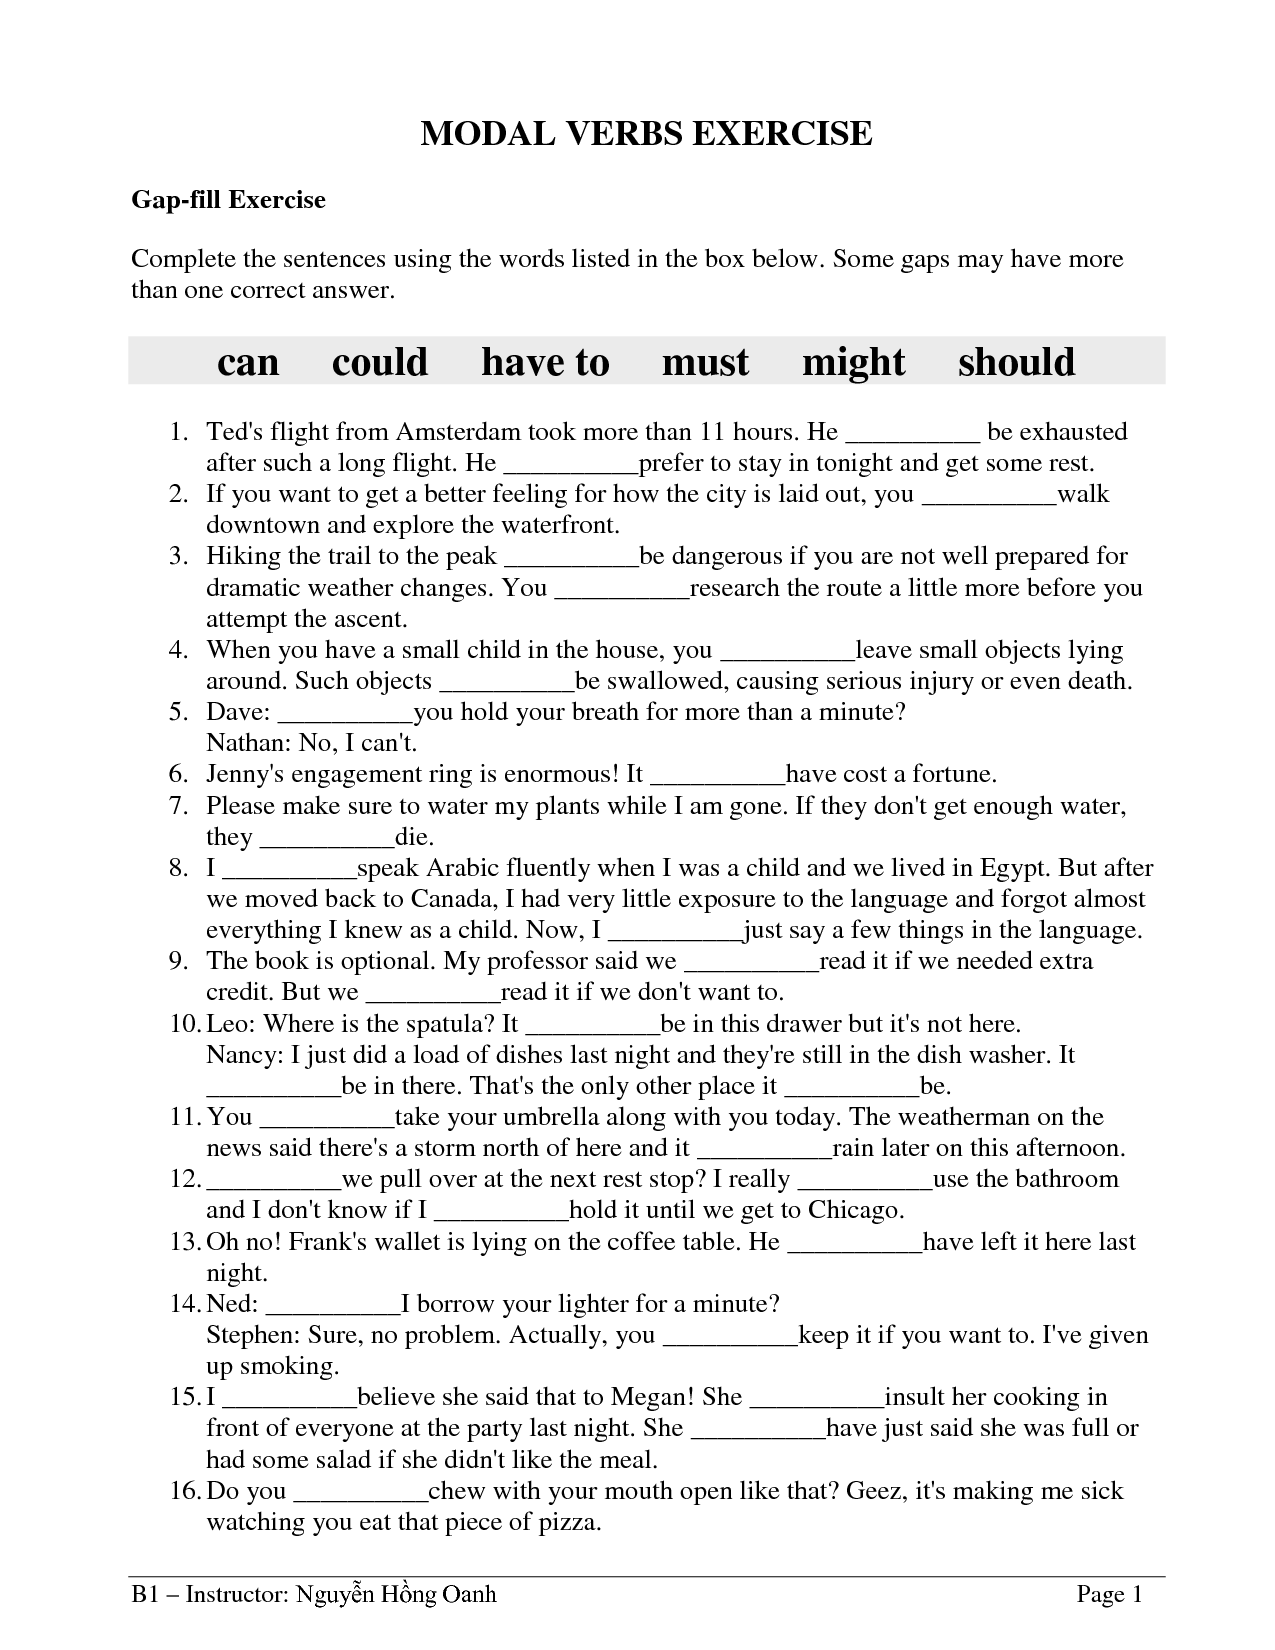 15-best-images-of-modals-can-could-worksheets-and-can-could-worksheet-modal-verbs-exercises